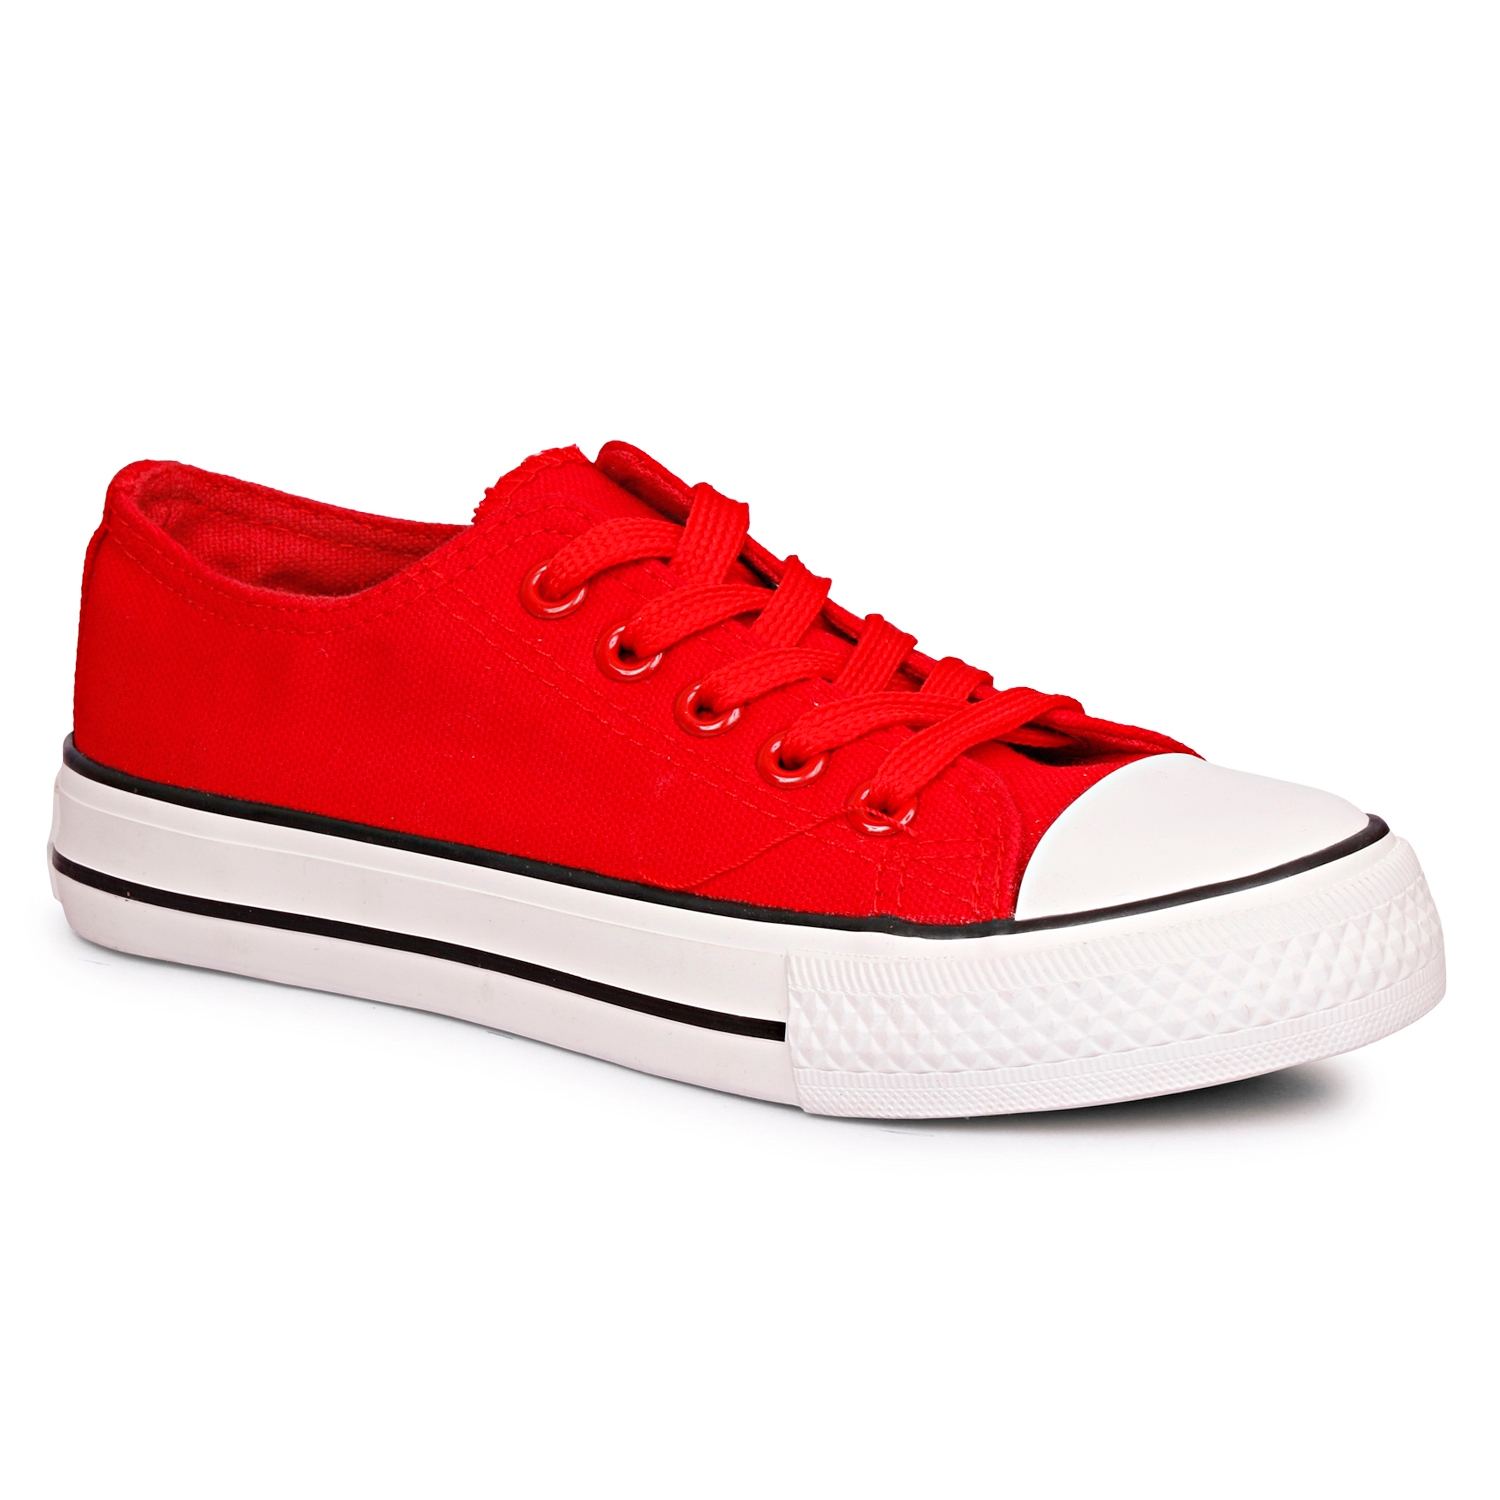 Cipramo | CIPRAMO SPORTS Red Canvas Sports Casual Shoes Sneakers Shoes for Boys, Walking,Running/Gymwear Shoes for Daily Use